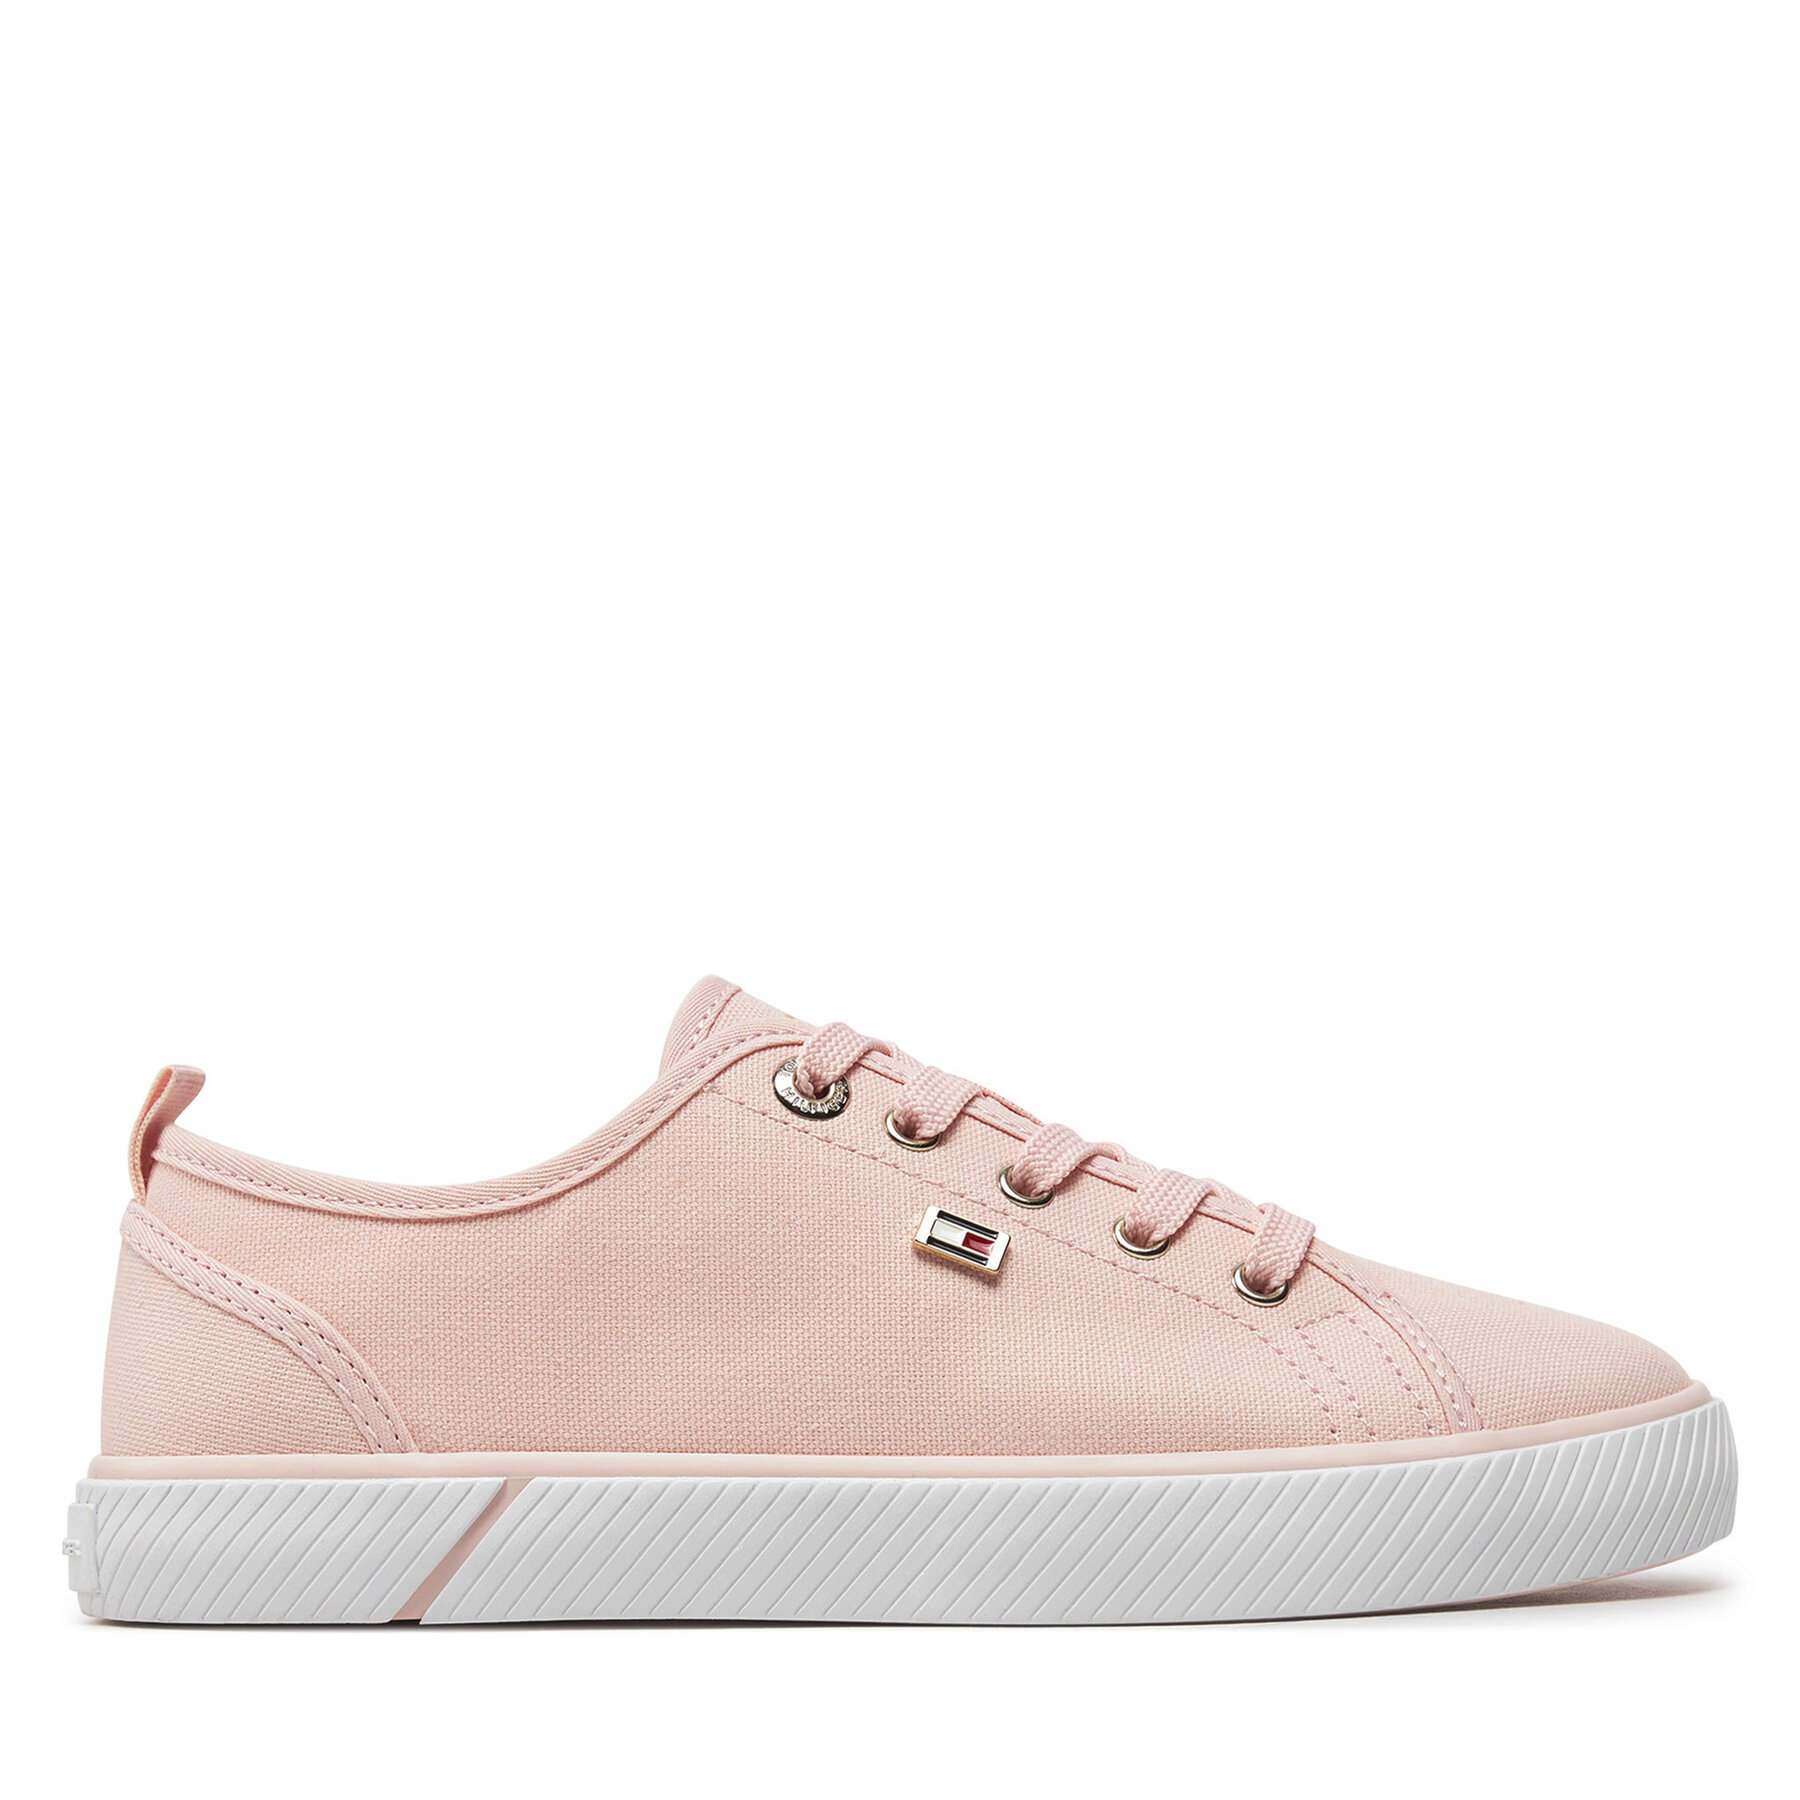 Sneakers aus Stoff Tommy Hilfiger Vulc Canvas Sneaker FW0FW08063 Rosa von Tommy Hilfiger